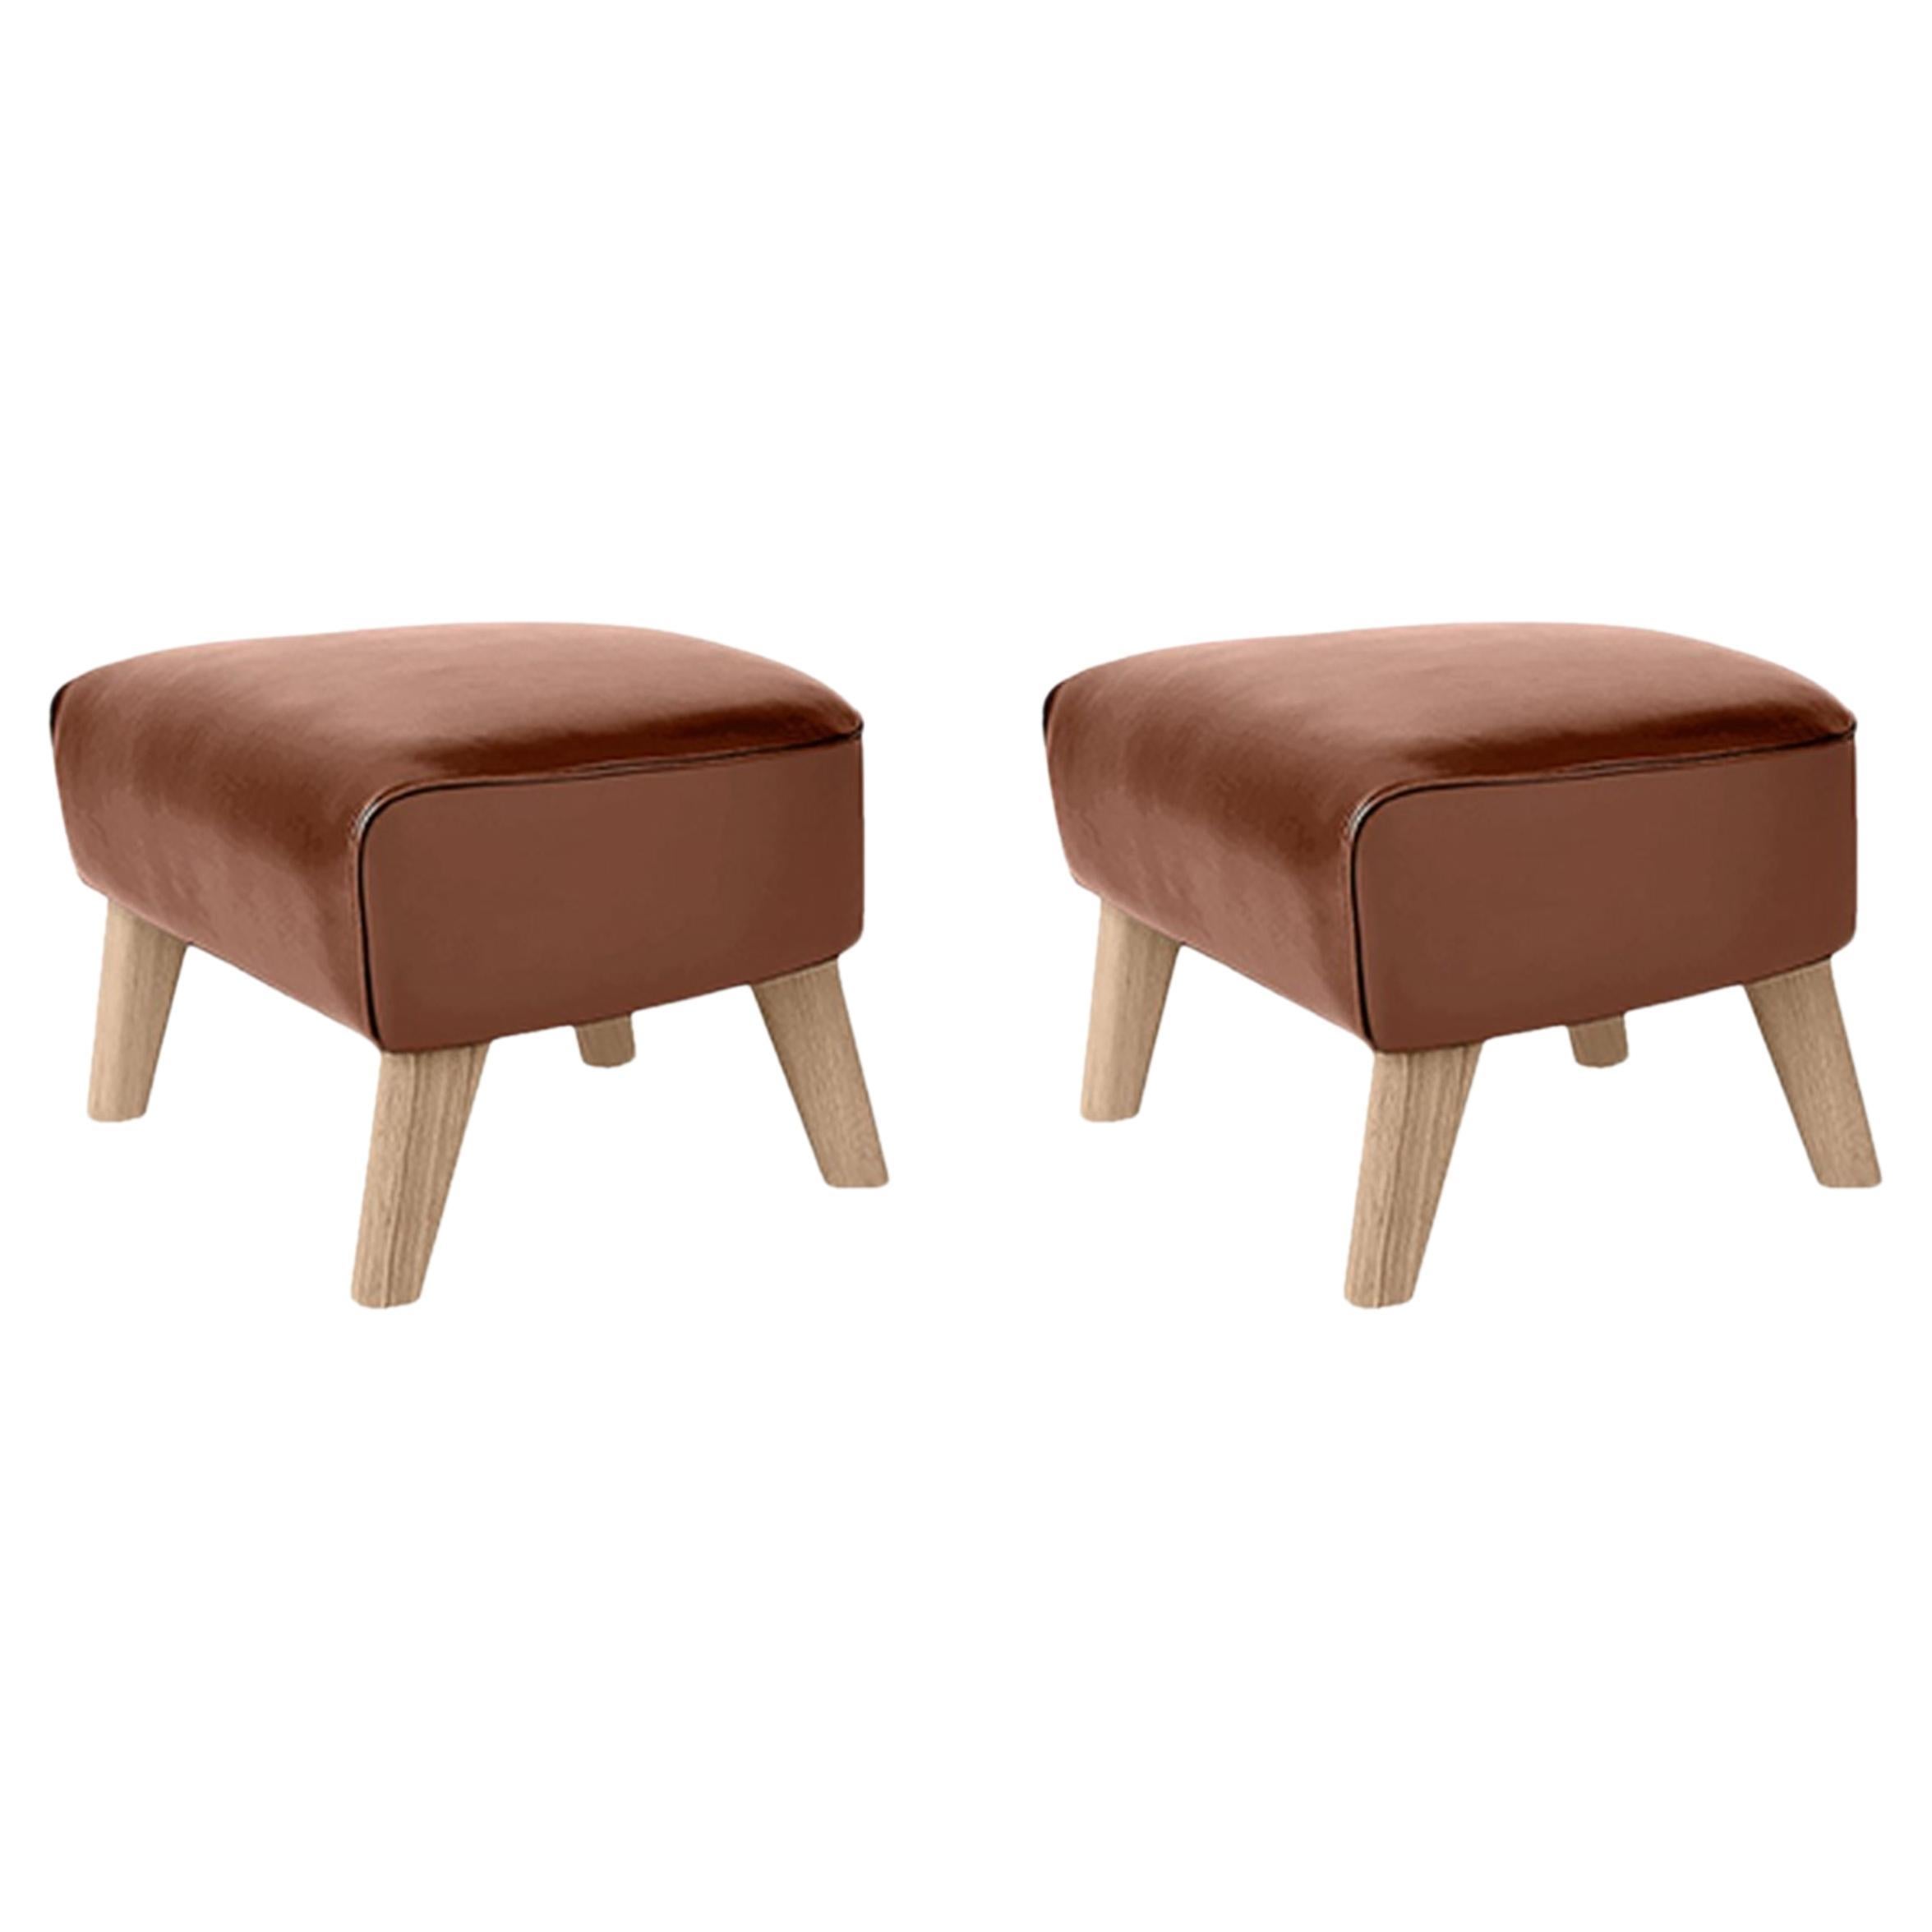 Set of 2 Brown Leather and Natural Oak My Own Chair Footstools by Lassen